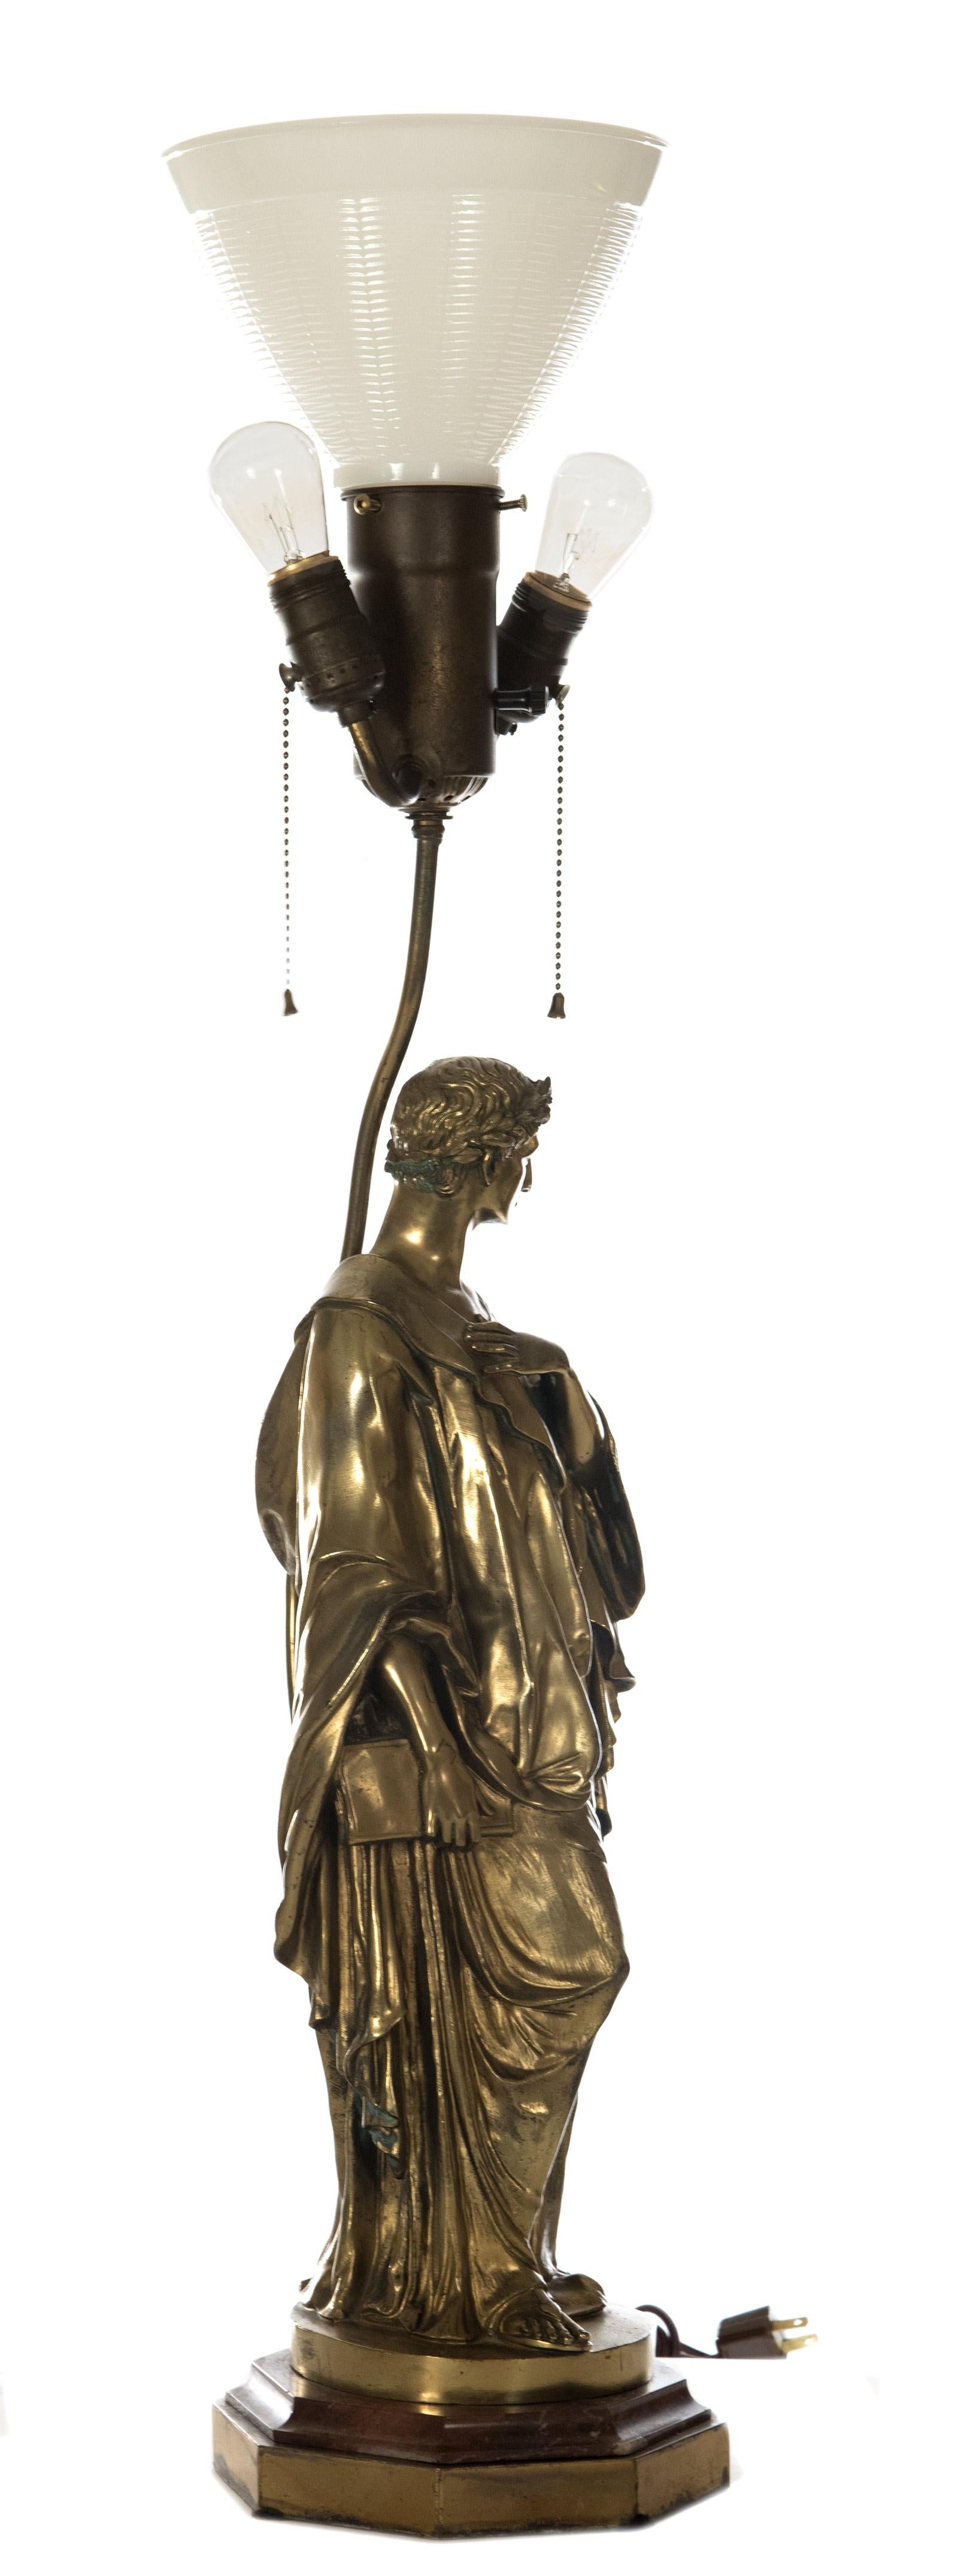 A bronze gilt-painted, three-light figural table lamp from Tiffany & Co., the stem supported by a Romanesque robed scholar holding a book, their head set with a crown of laurels, all on a round base that is stamped with 